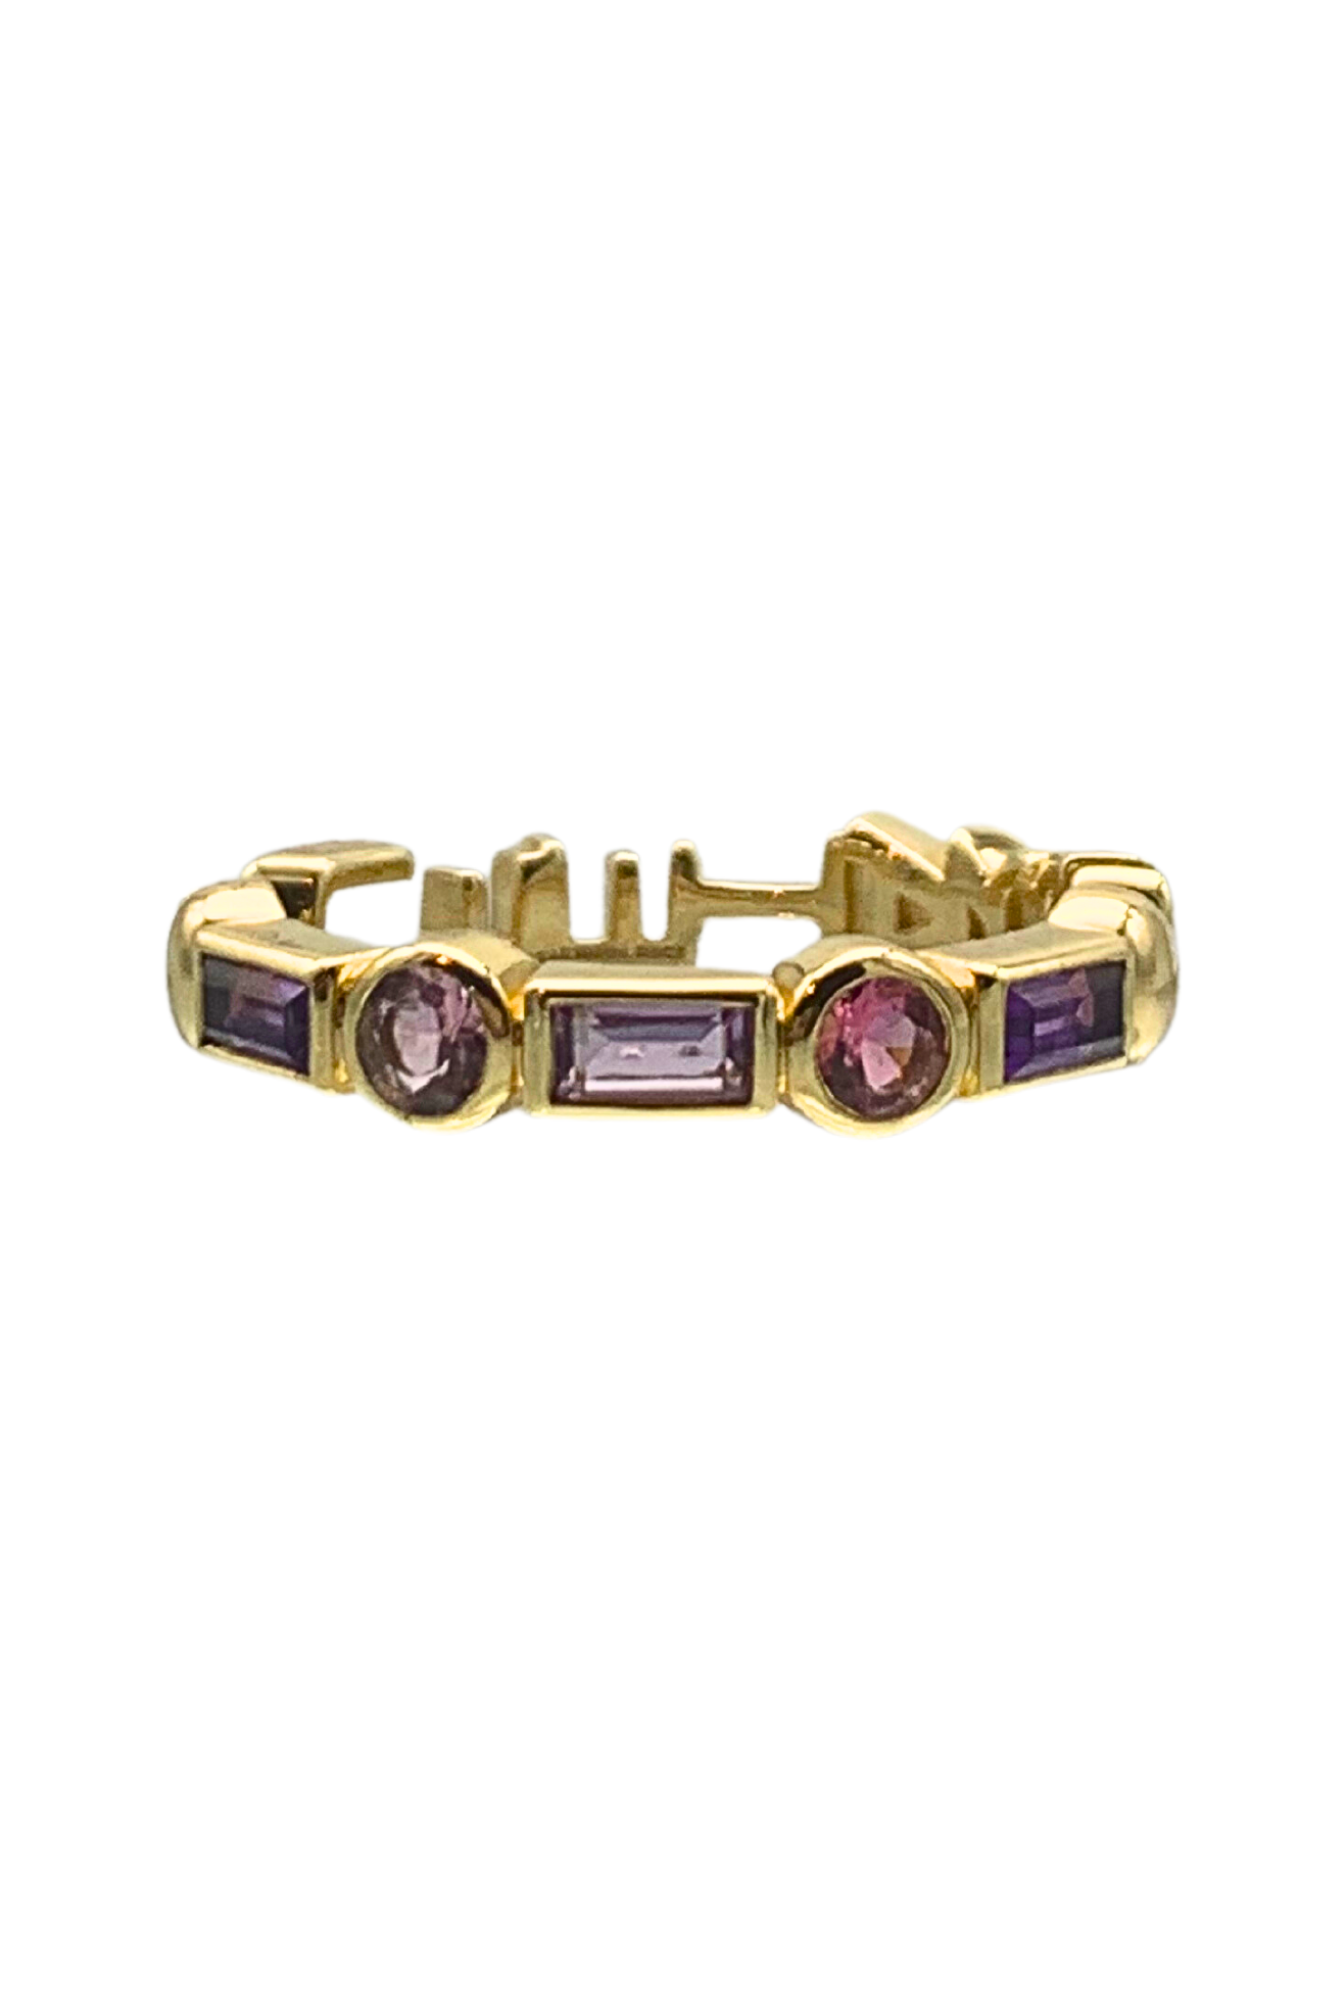 The Tattoo Candy bands from Eden Presley feature classic color combinations and golden mantras. 